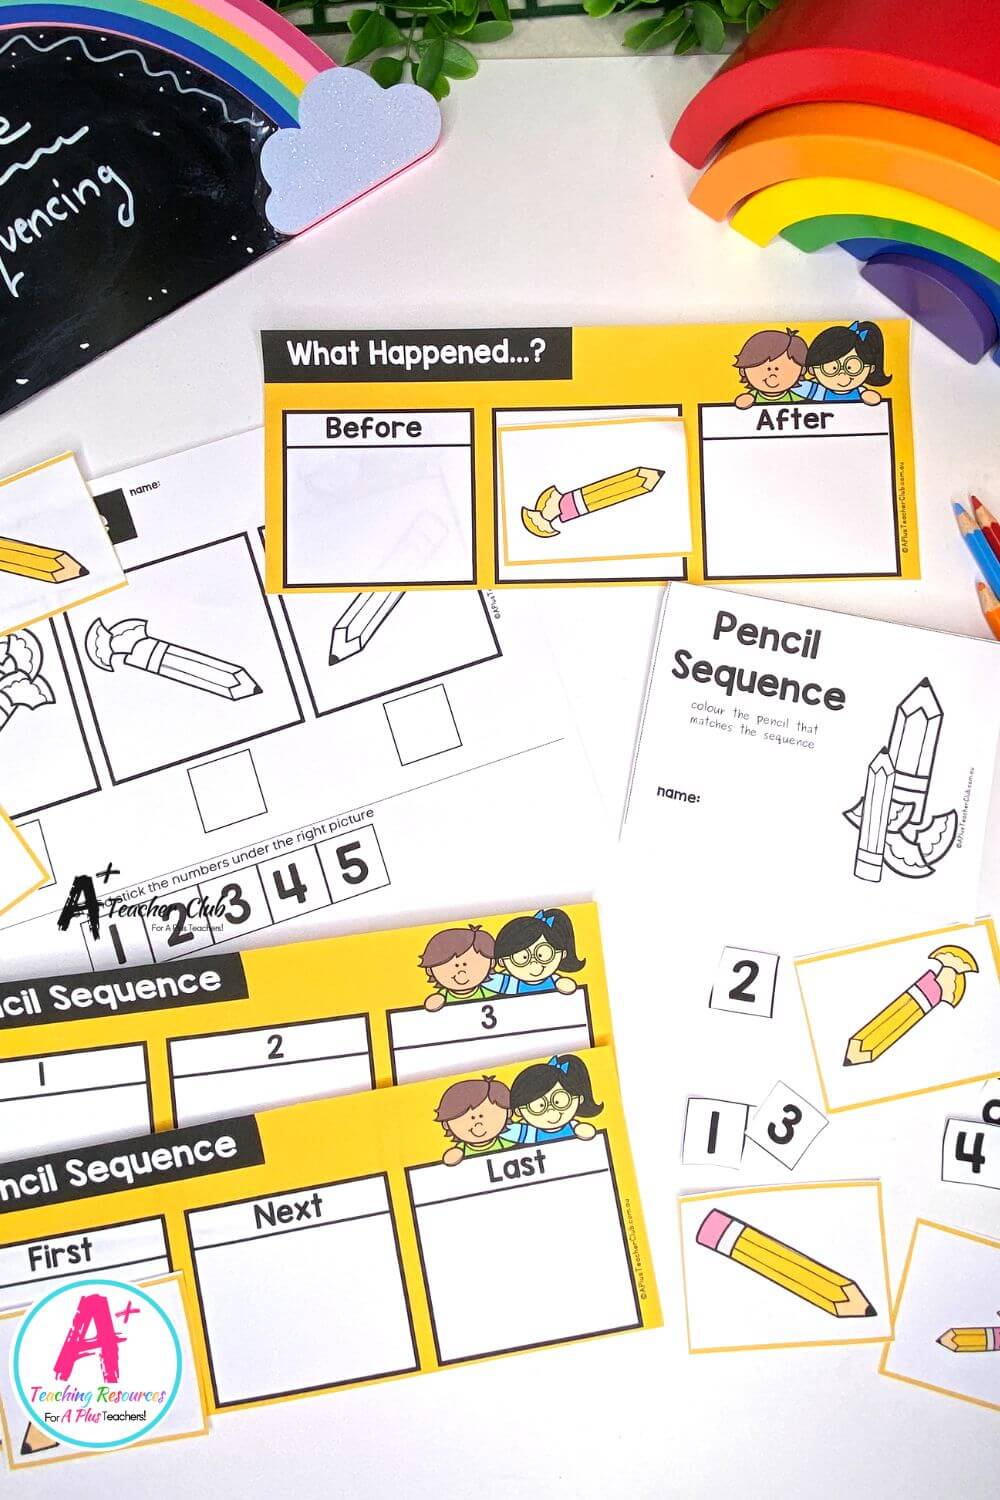 3-Step Sequencing Everyday Events - Sharpening Pencils Activities Pack